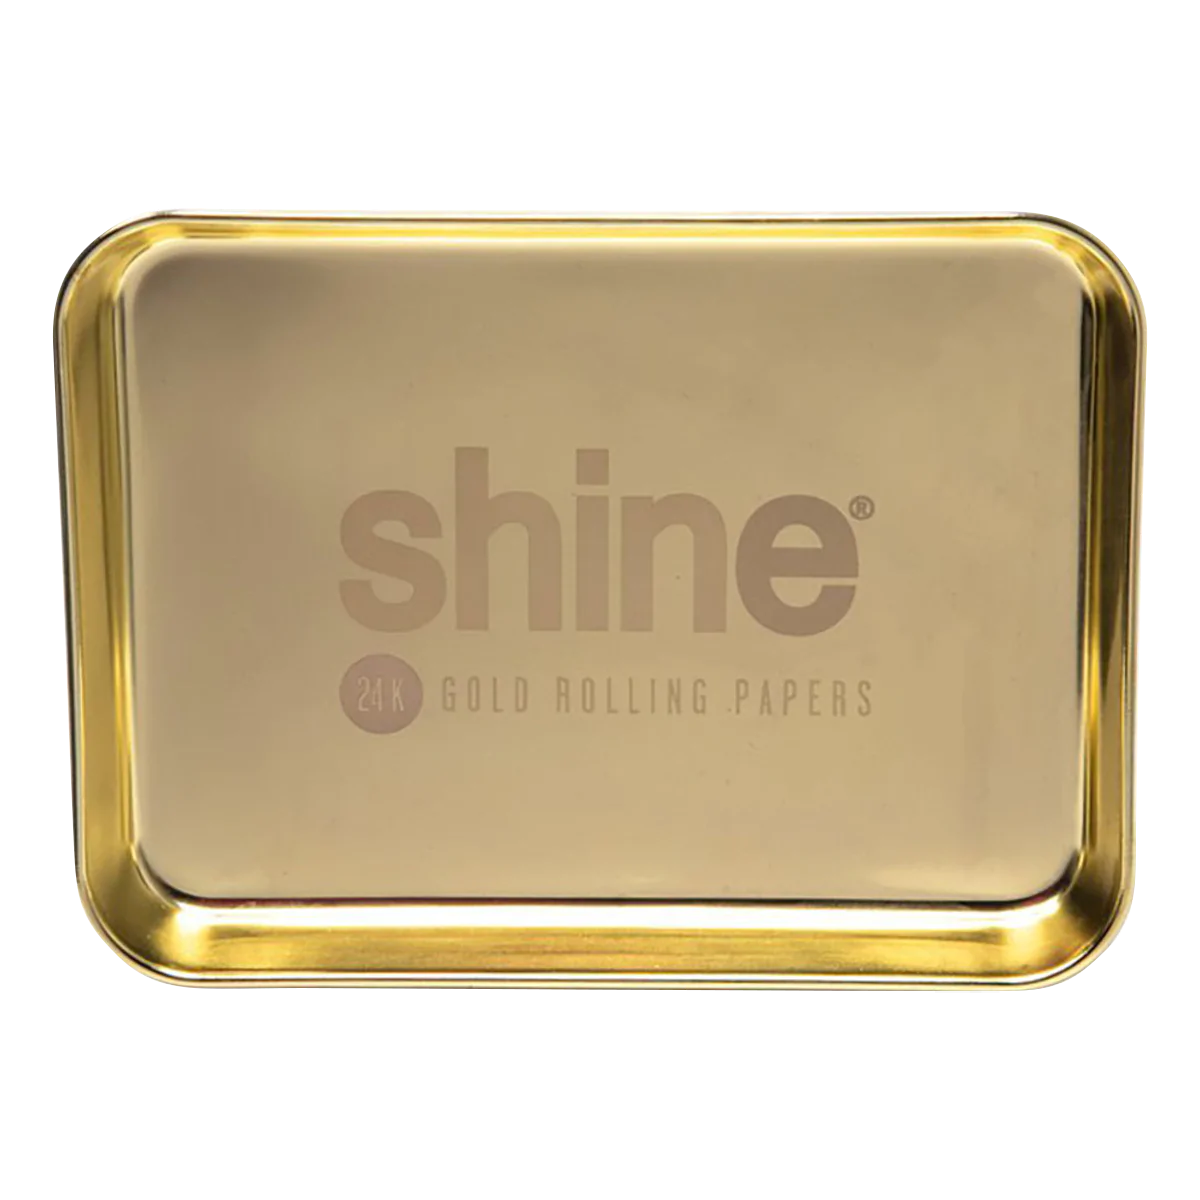 Shine Gold Rolling Tray for Dry Herbs, Compact Steel Design, Top View